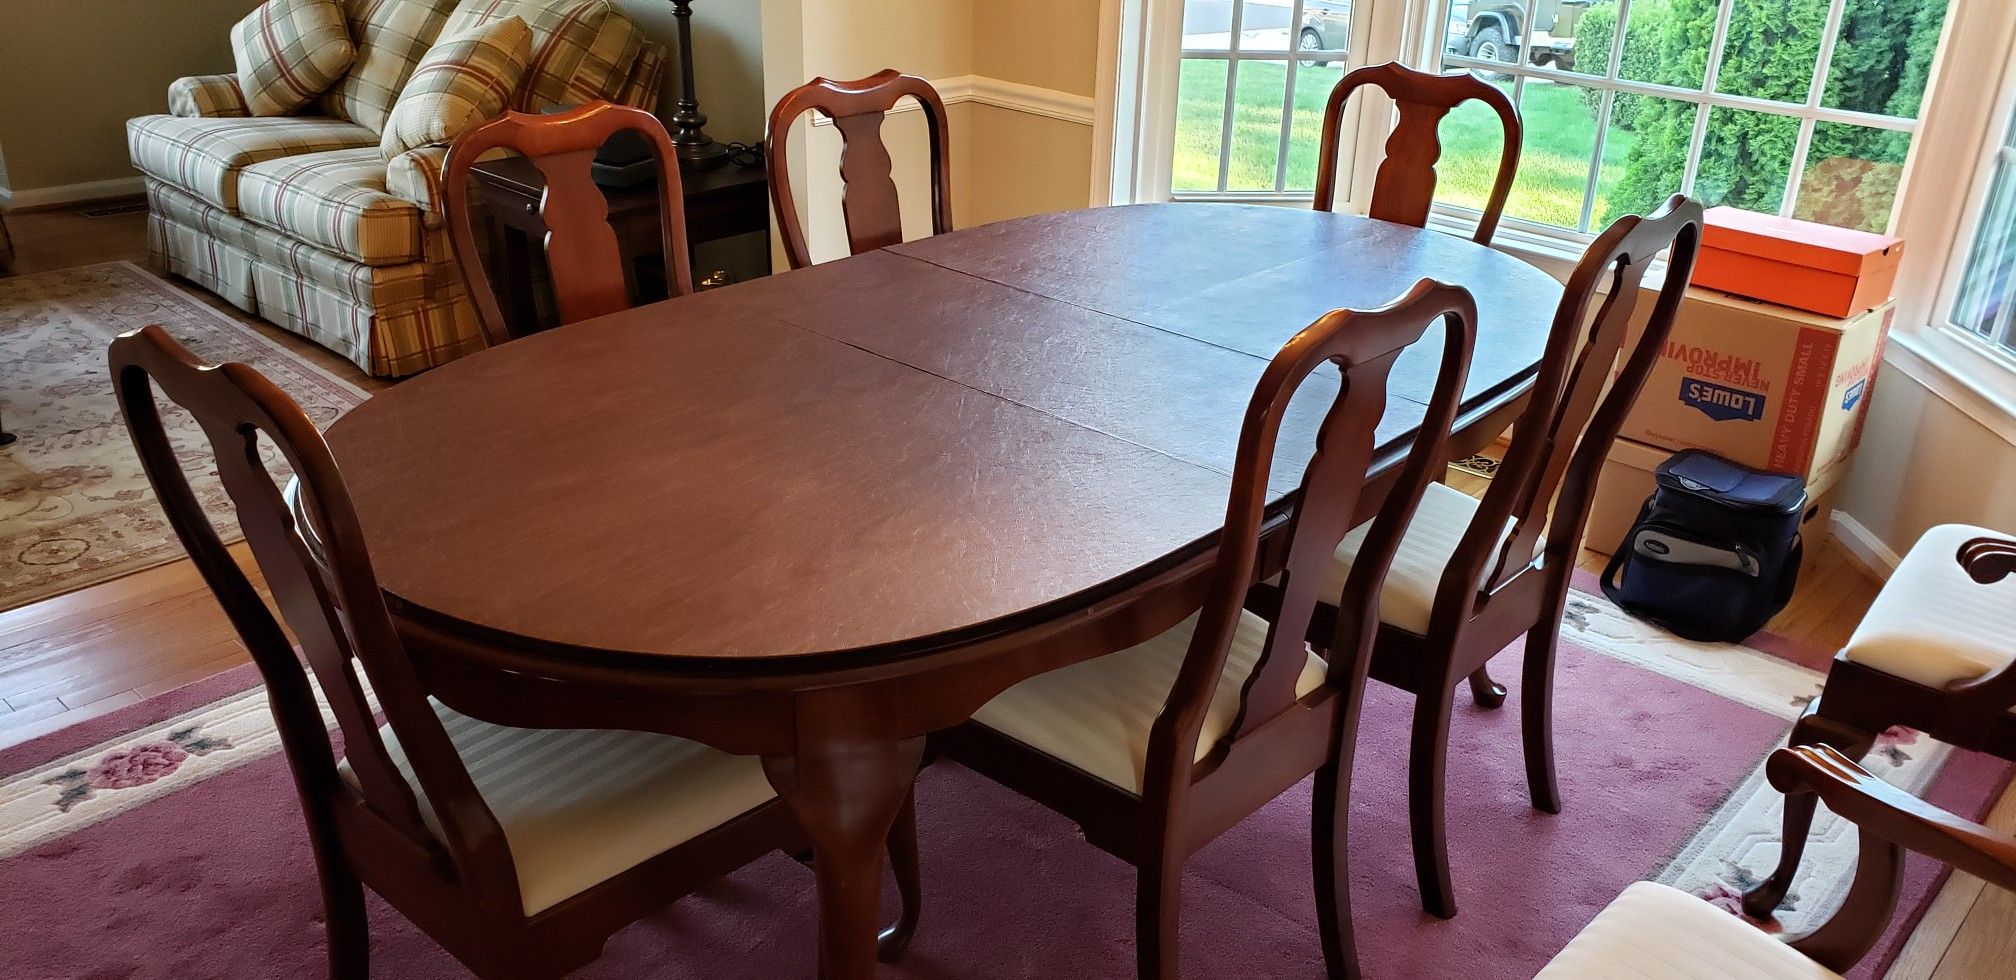 Dining room table set from Pennsylvania House